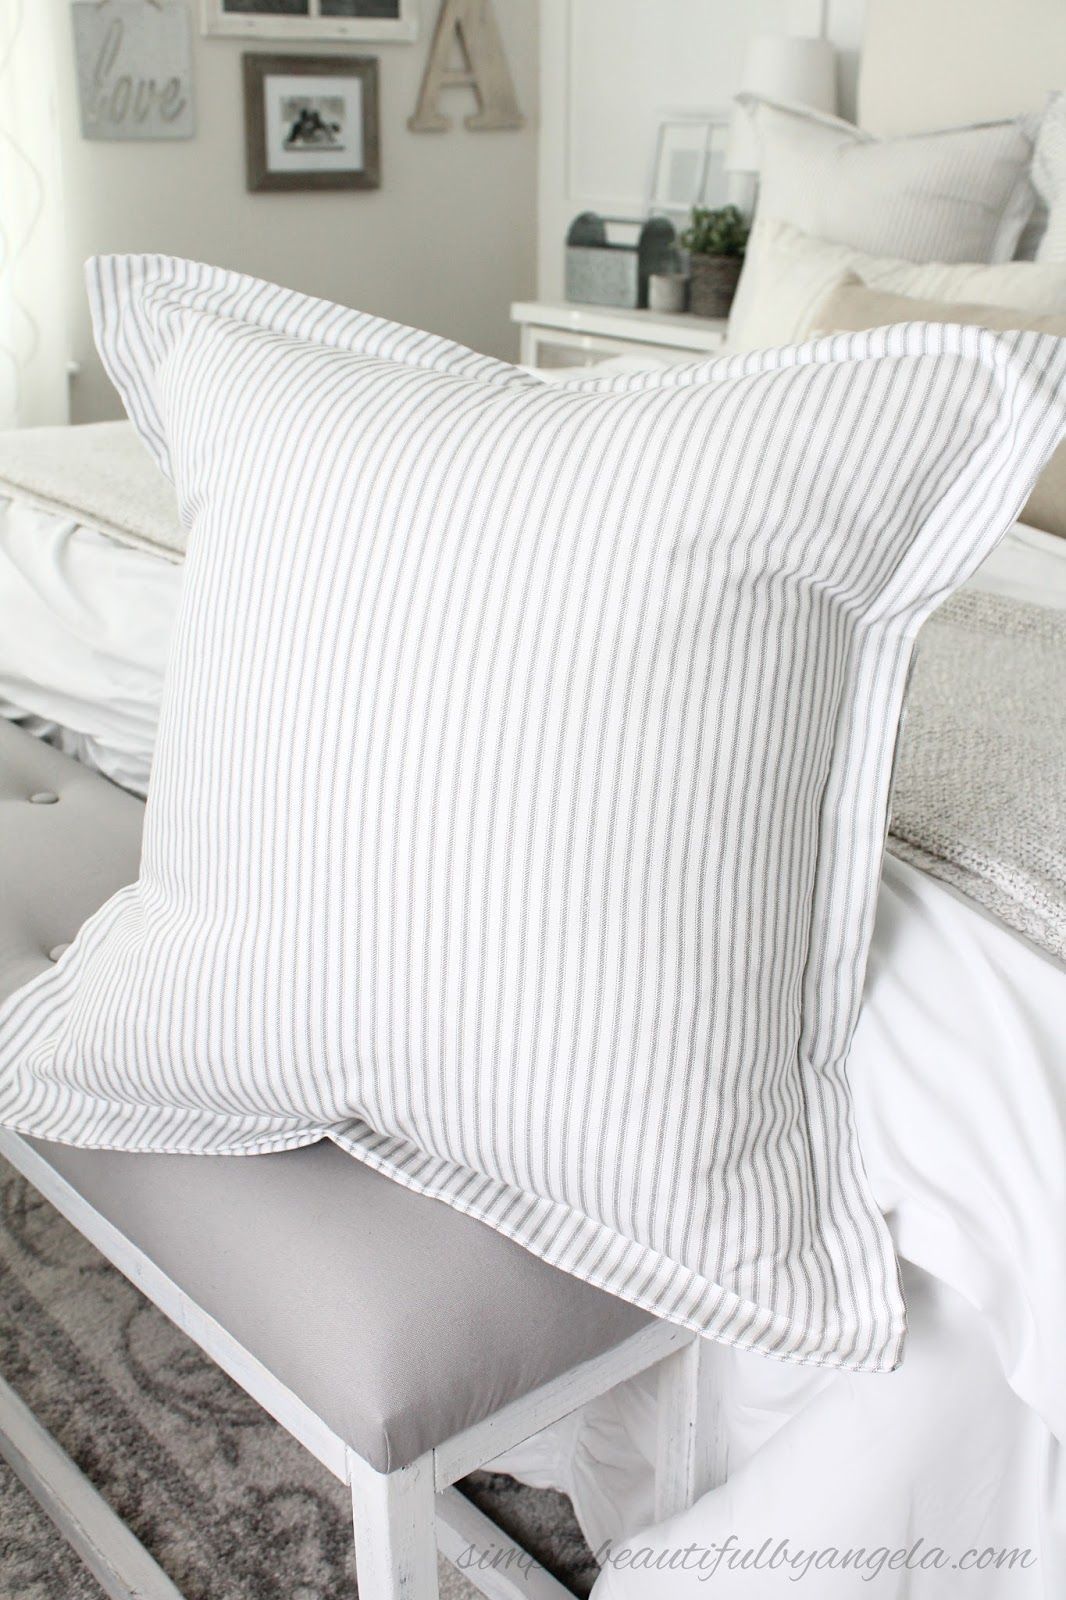 DIY Euro Pillows with Flanges | Simply Beautiful By Angela - DIY Euro Pillows with Flanges | Simply Beautiful By Angela -   17 diy Pillows designs ideas